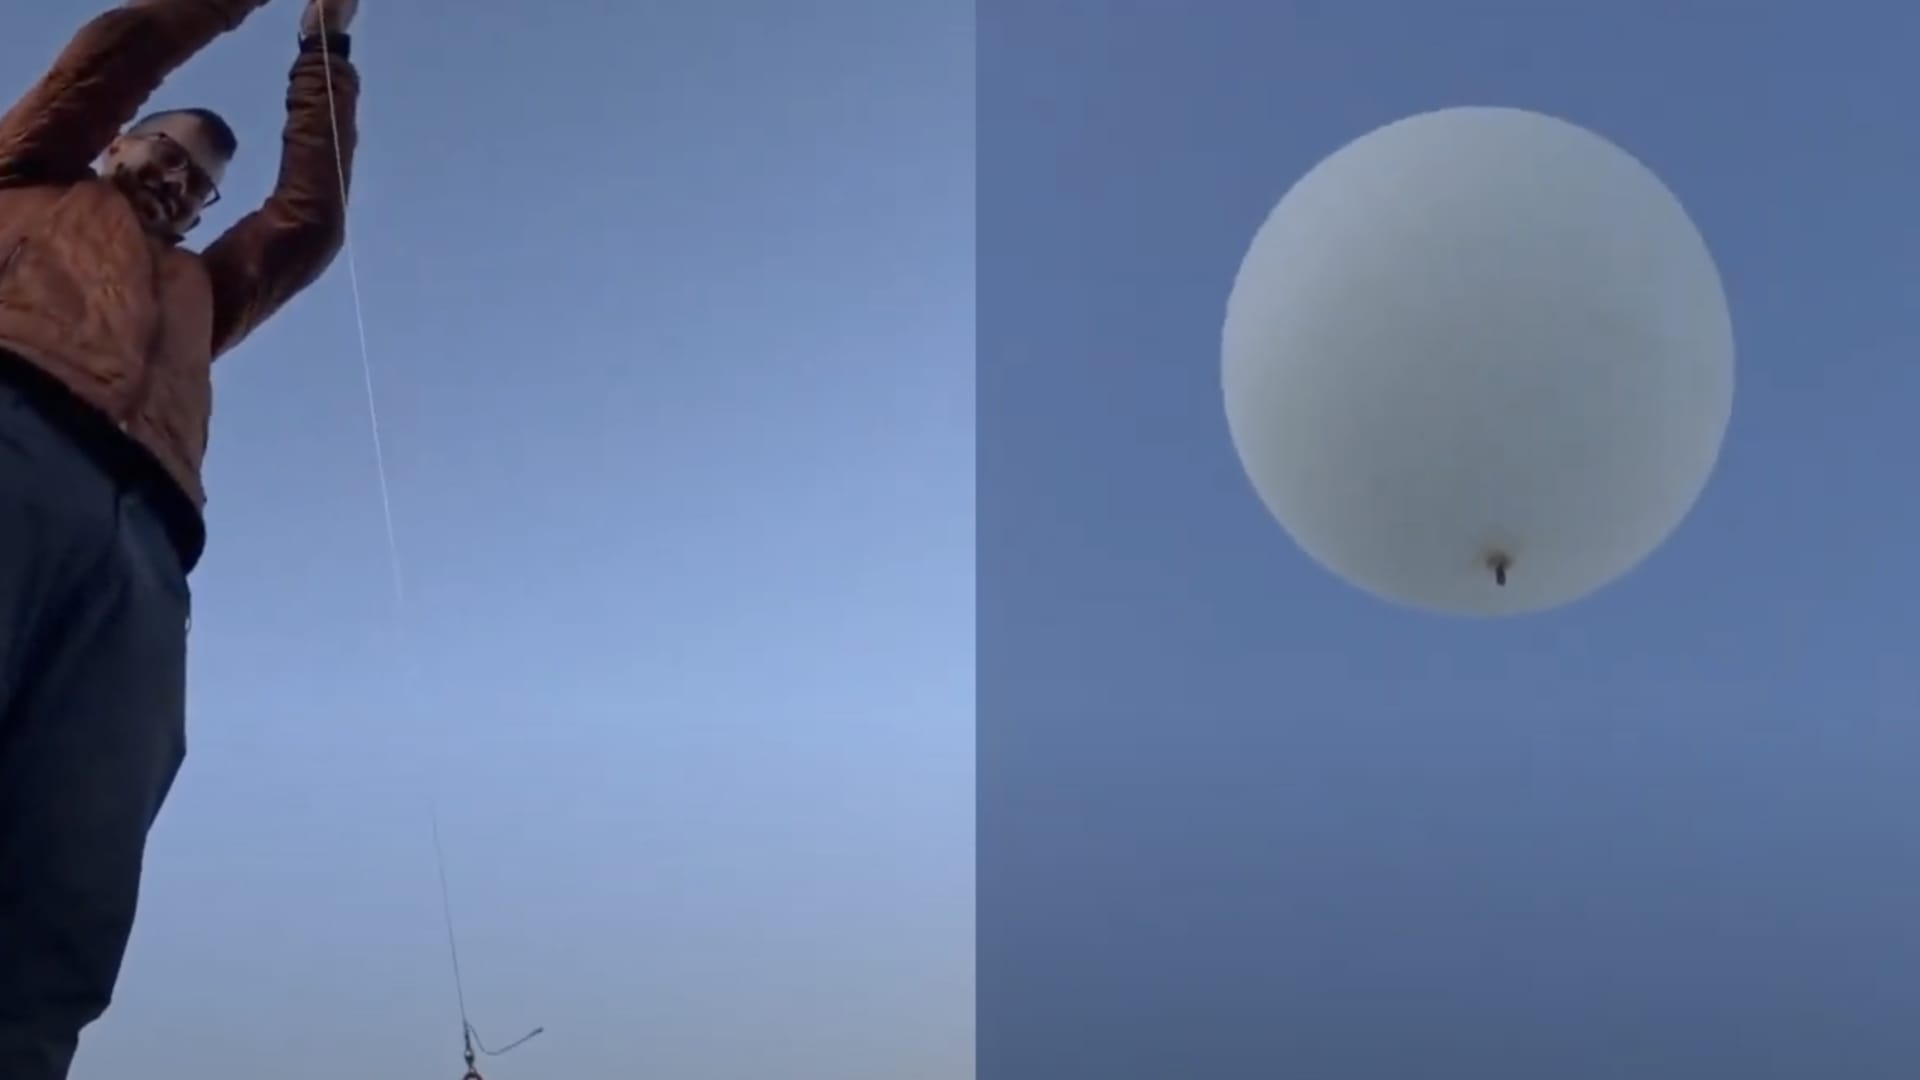 Make Sunsets launching a weather balloon filled with sulfur dioxide and helium into the air in Nevada.